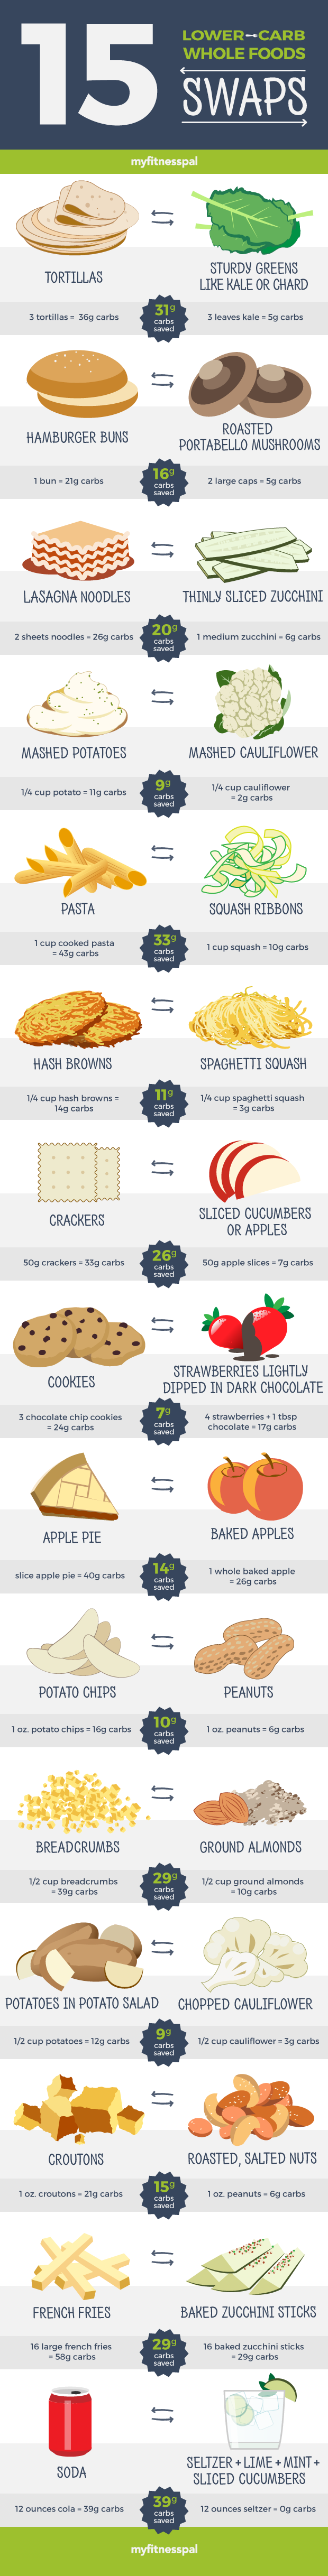 15 Food Swaps That Are Low in Carbs